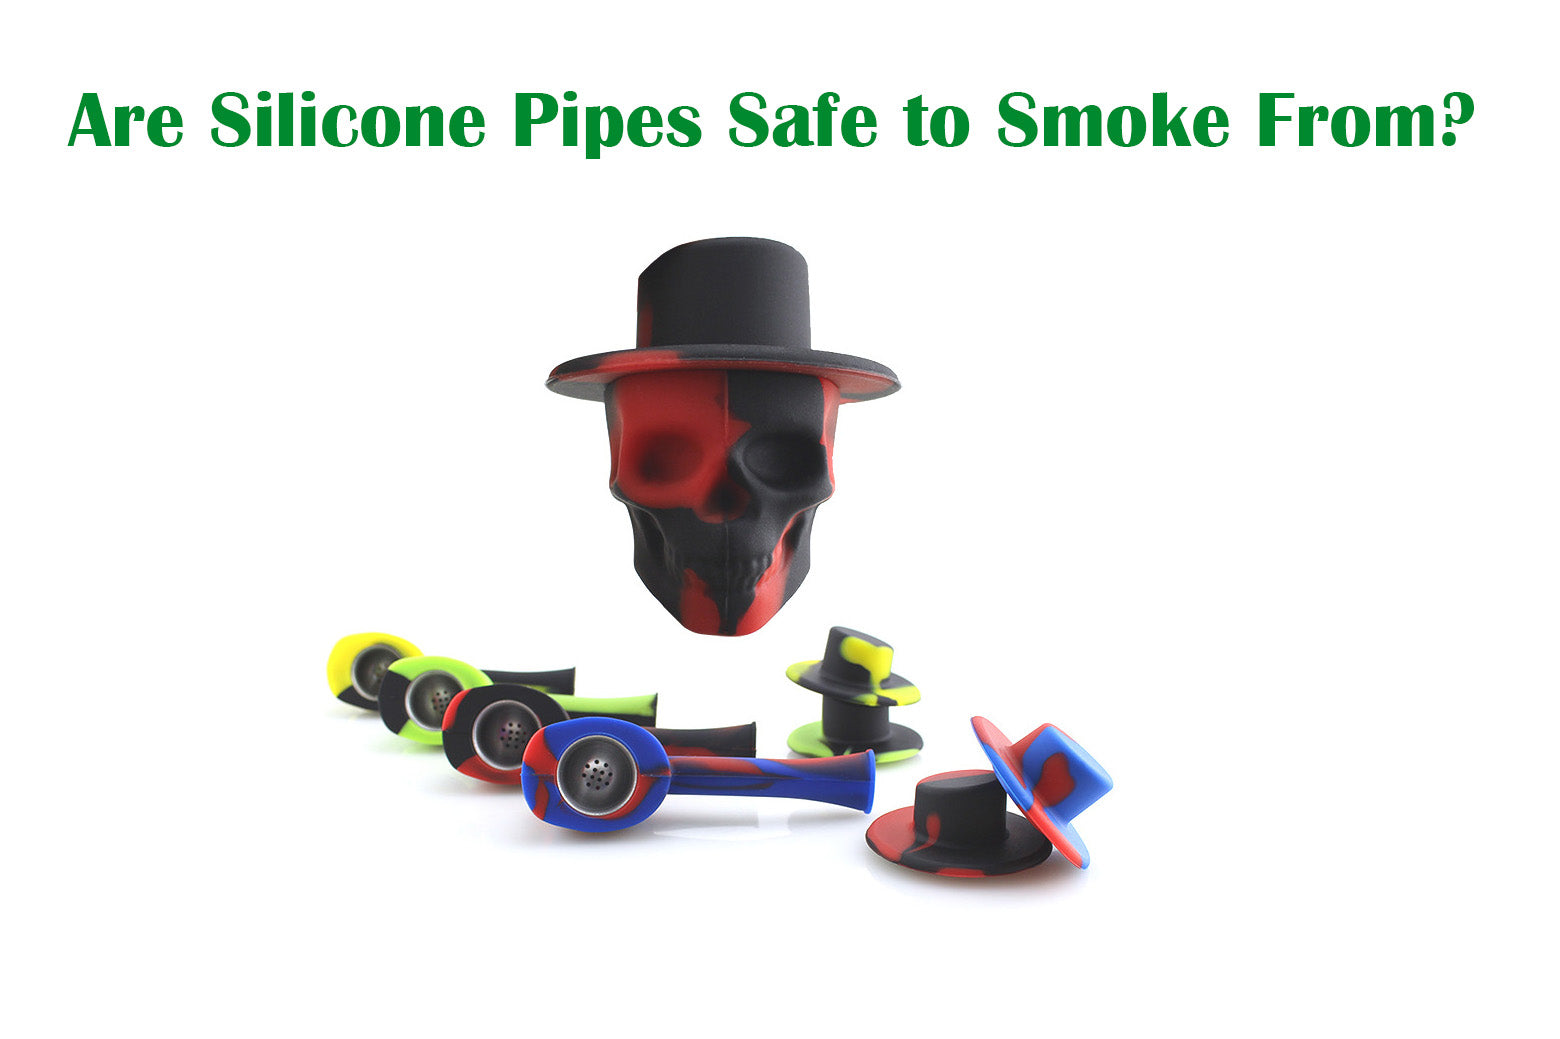 Are Silicone Pipes Safe to Smoke From?